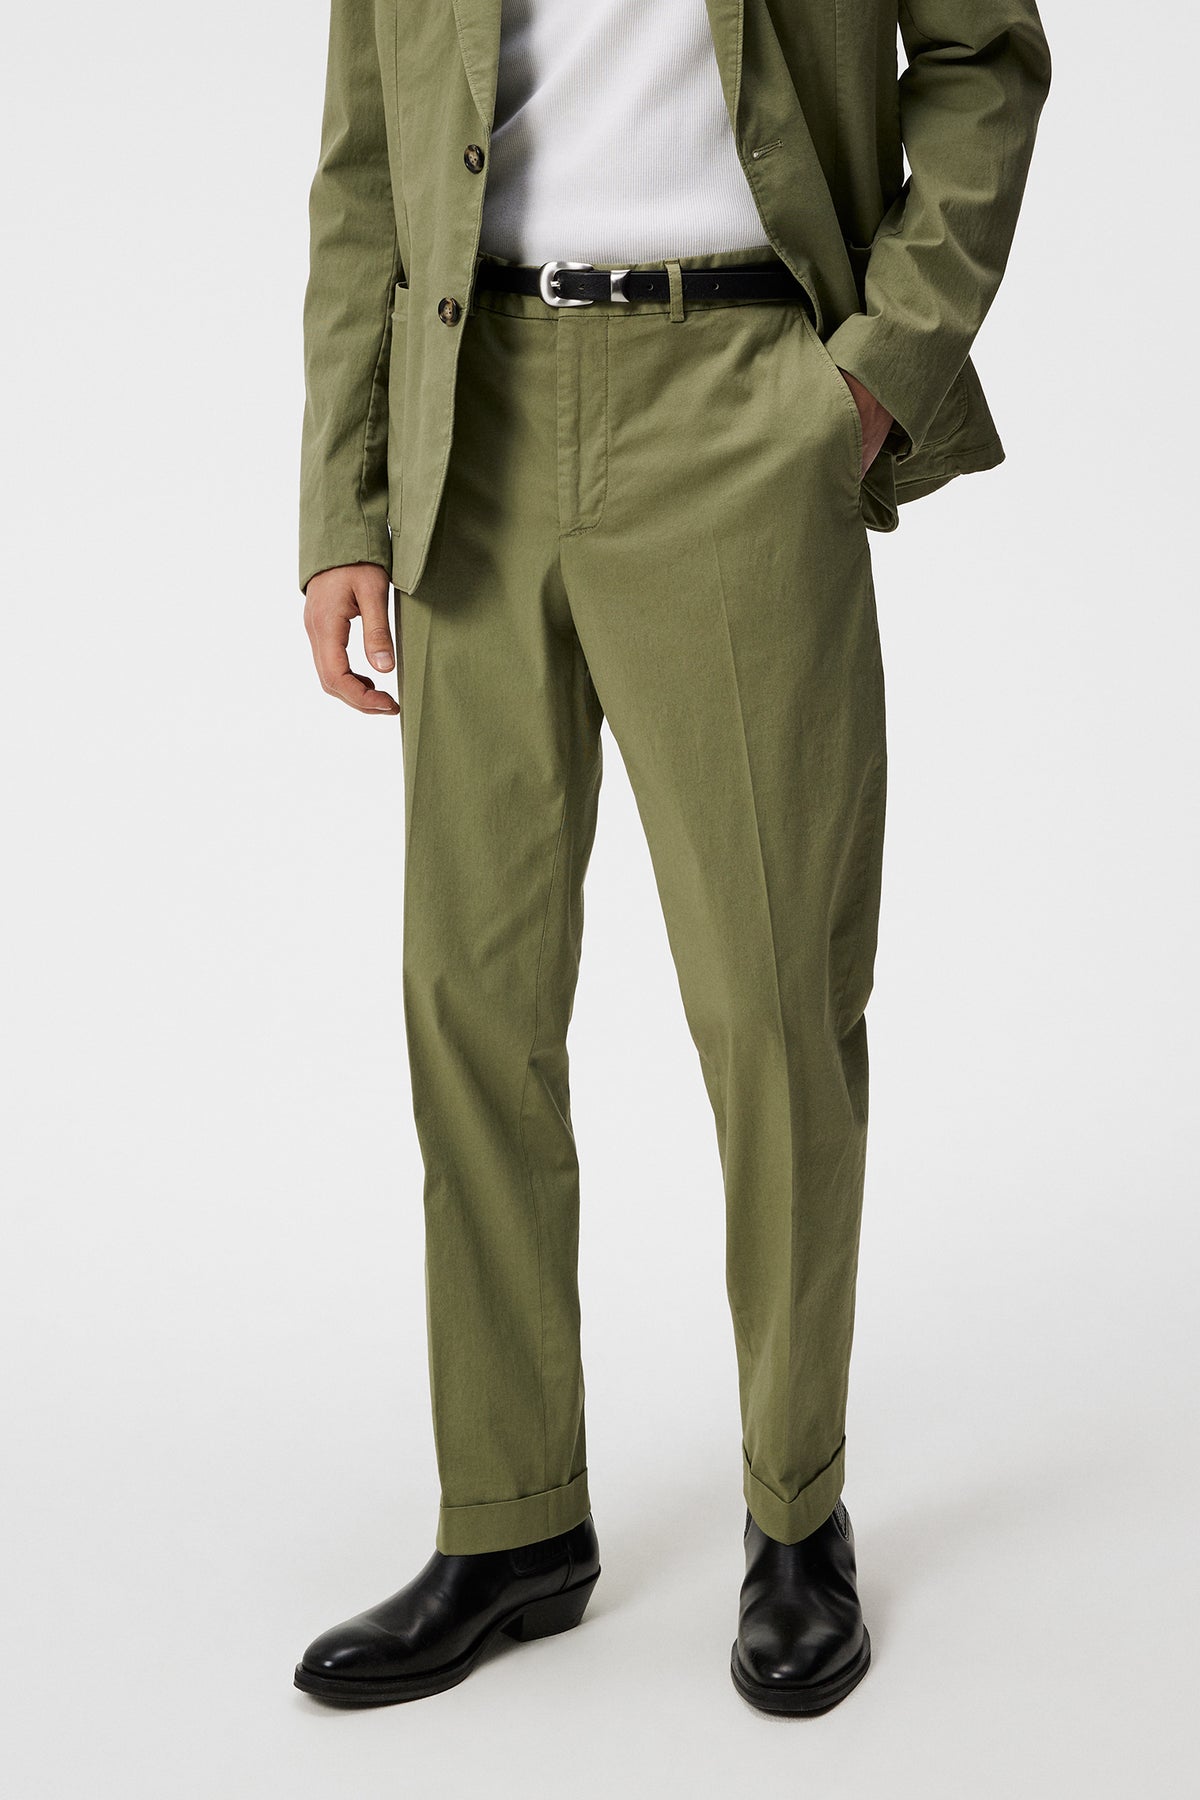 Lois GMT Dyed  Pants / Oil Green